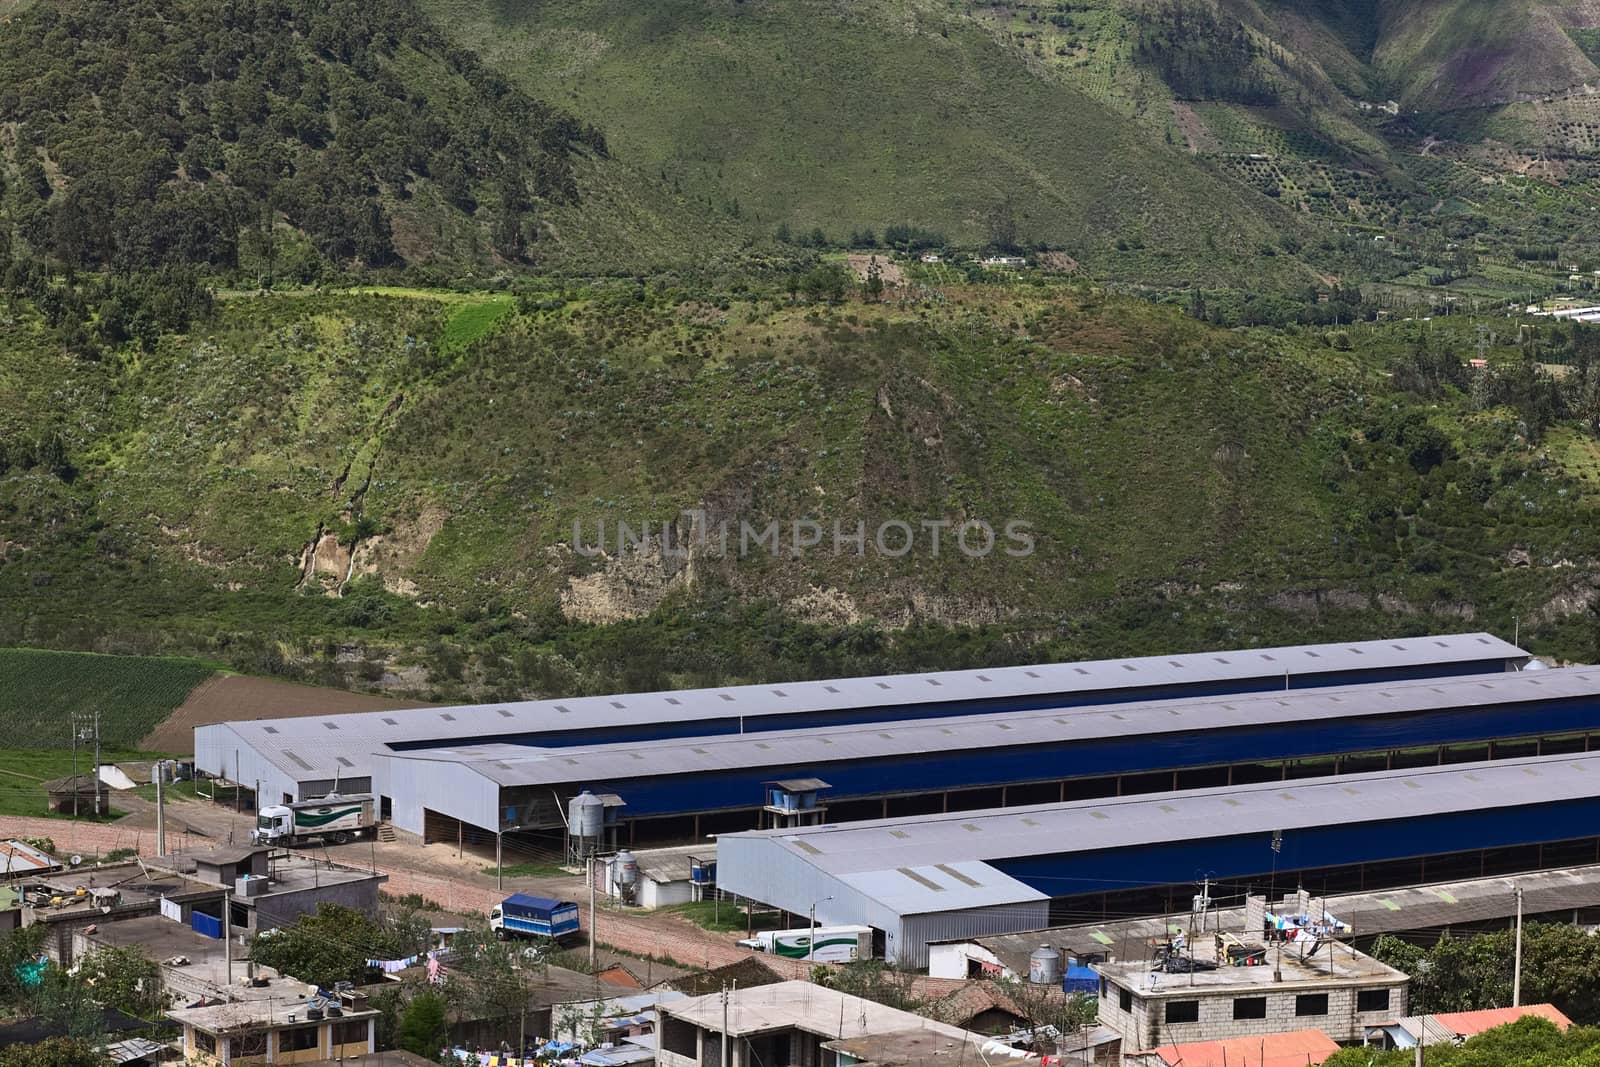 TUNGURAHUA PROVINCE, ECUADOR - JULY 29, 2014: Long agricultural or industrial halls along the road between Pelileo and Banos on July 29, 2014 in Tungurahua Province, Central Ecuador.